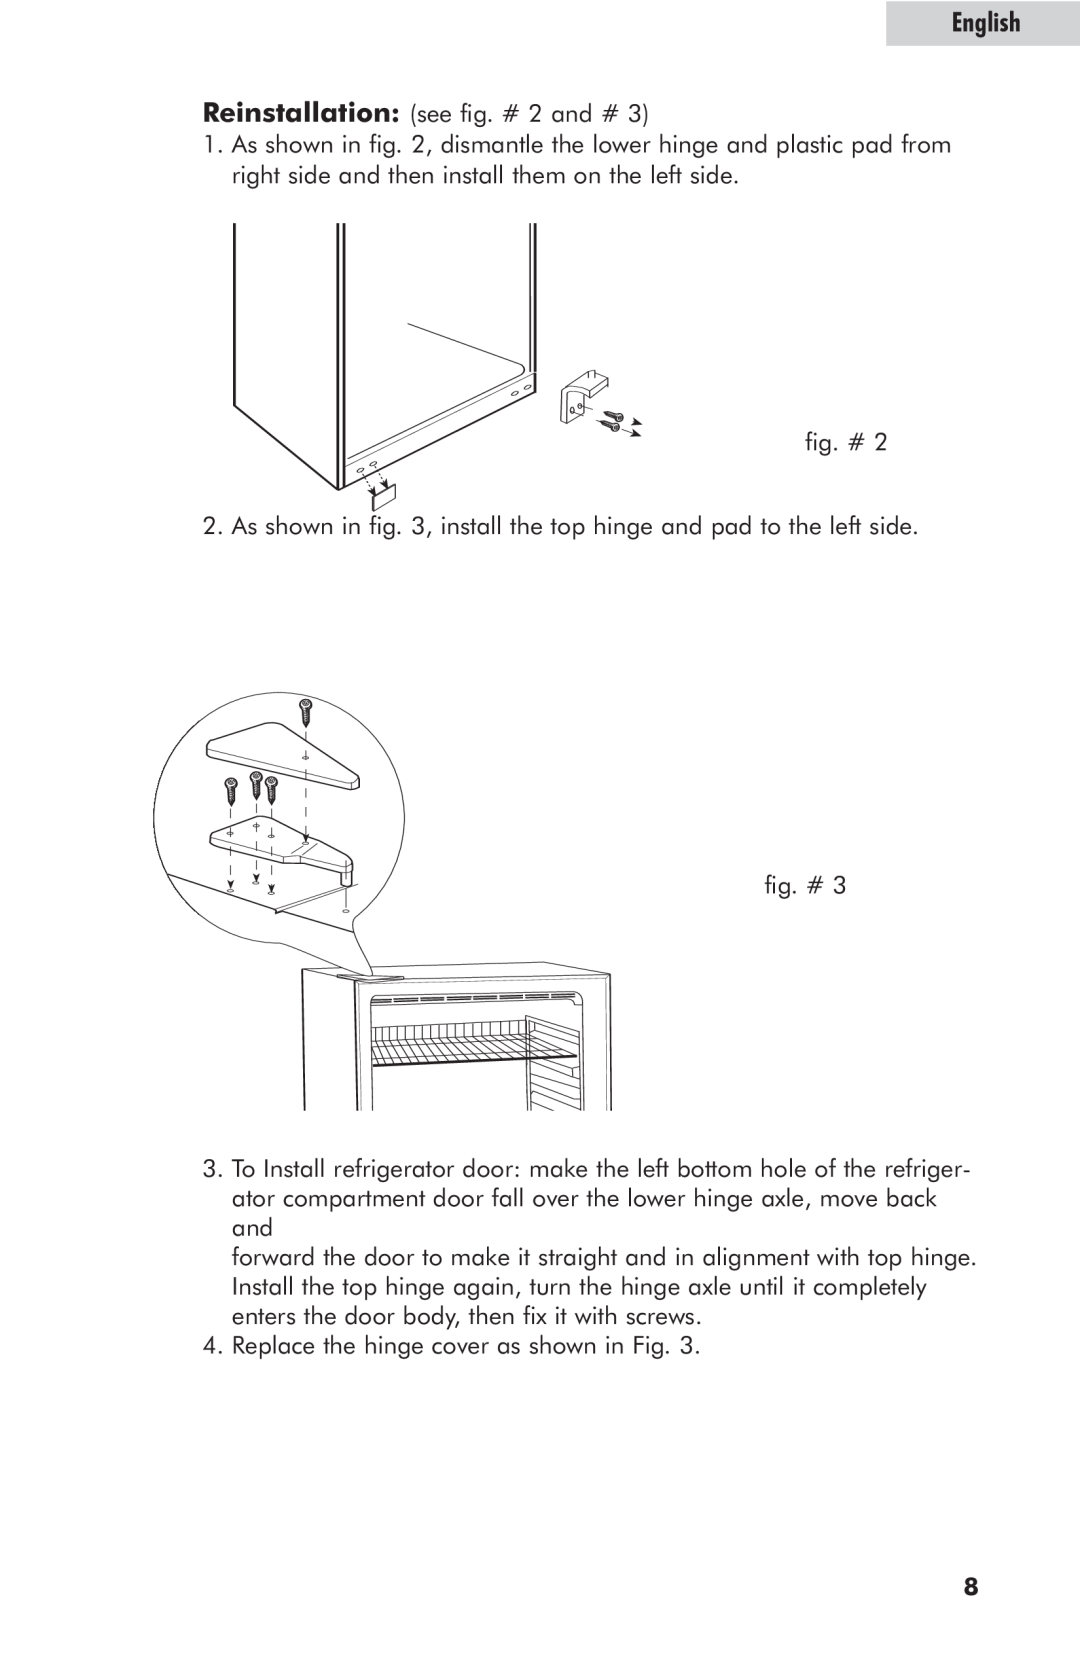 Haier HRE10WNAWW user manual English, Reinstallation see fig. # 2 and # 